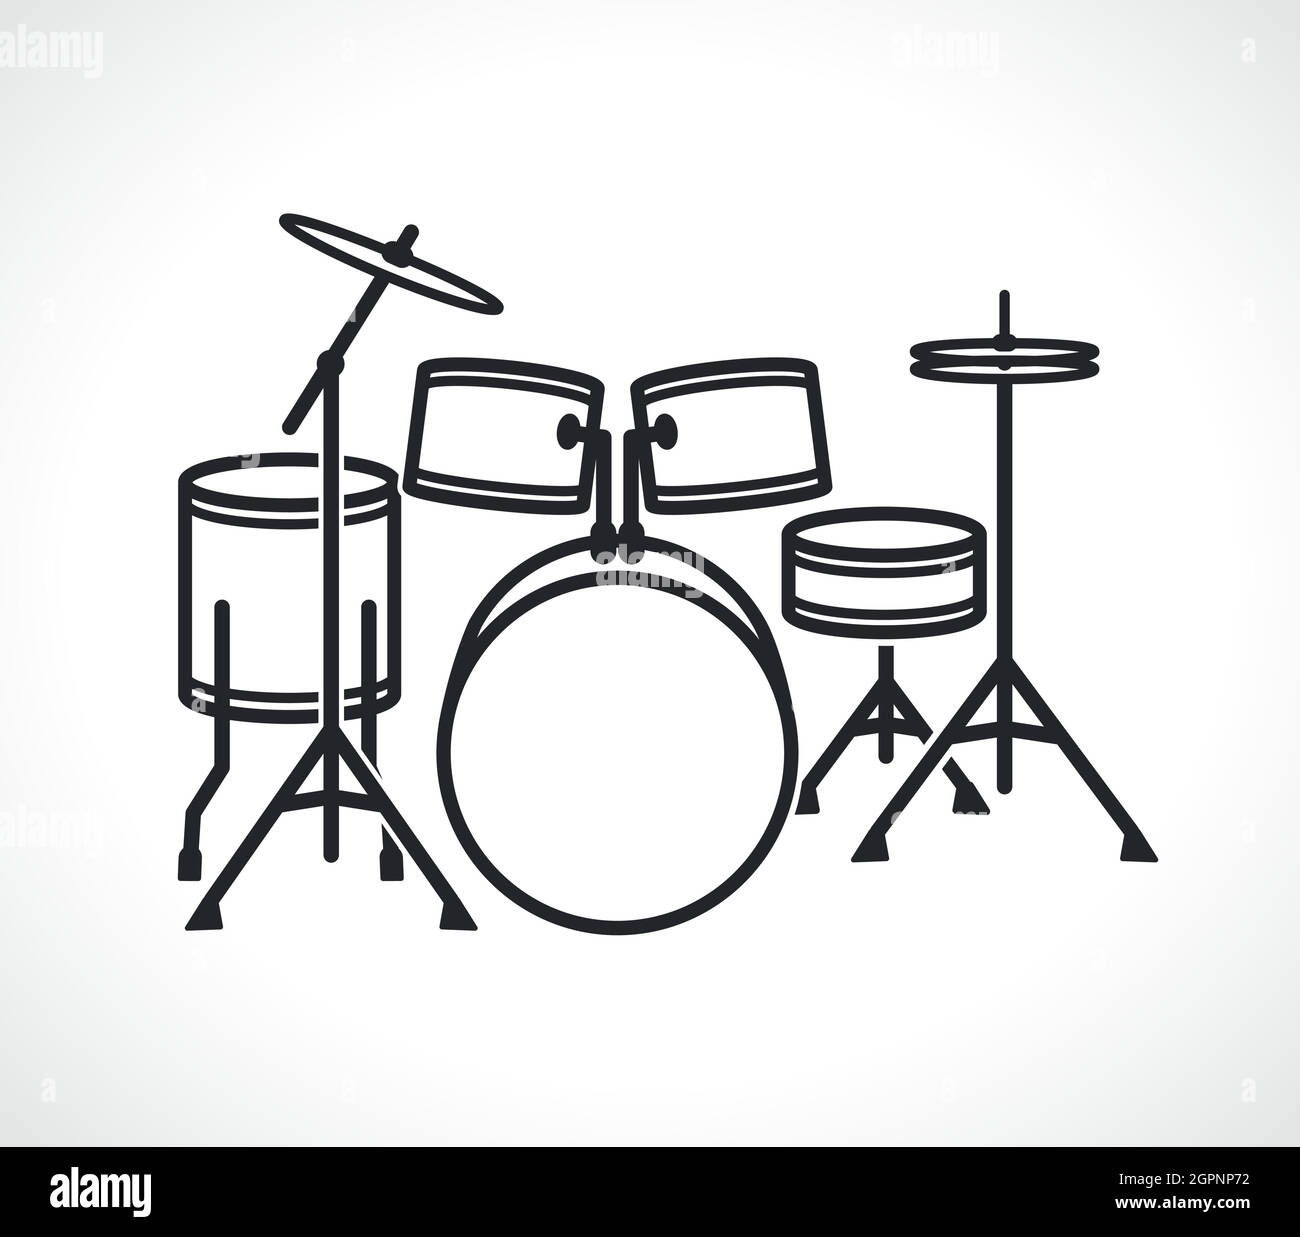 Learn How to Draw Drums Musical Instruments Step by Step  Drawing  Tutorials